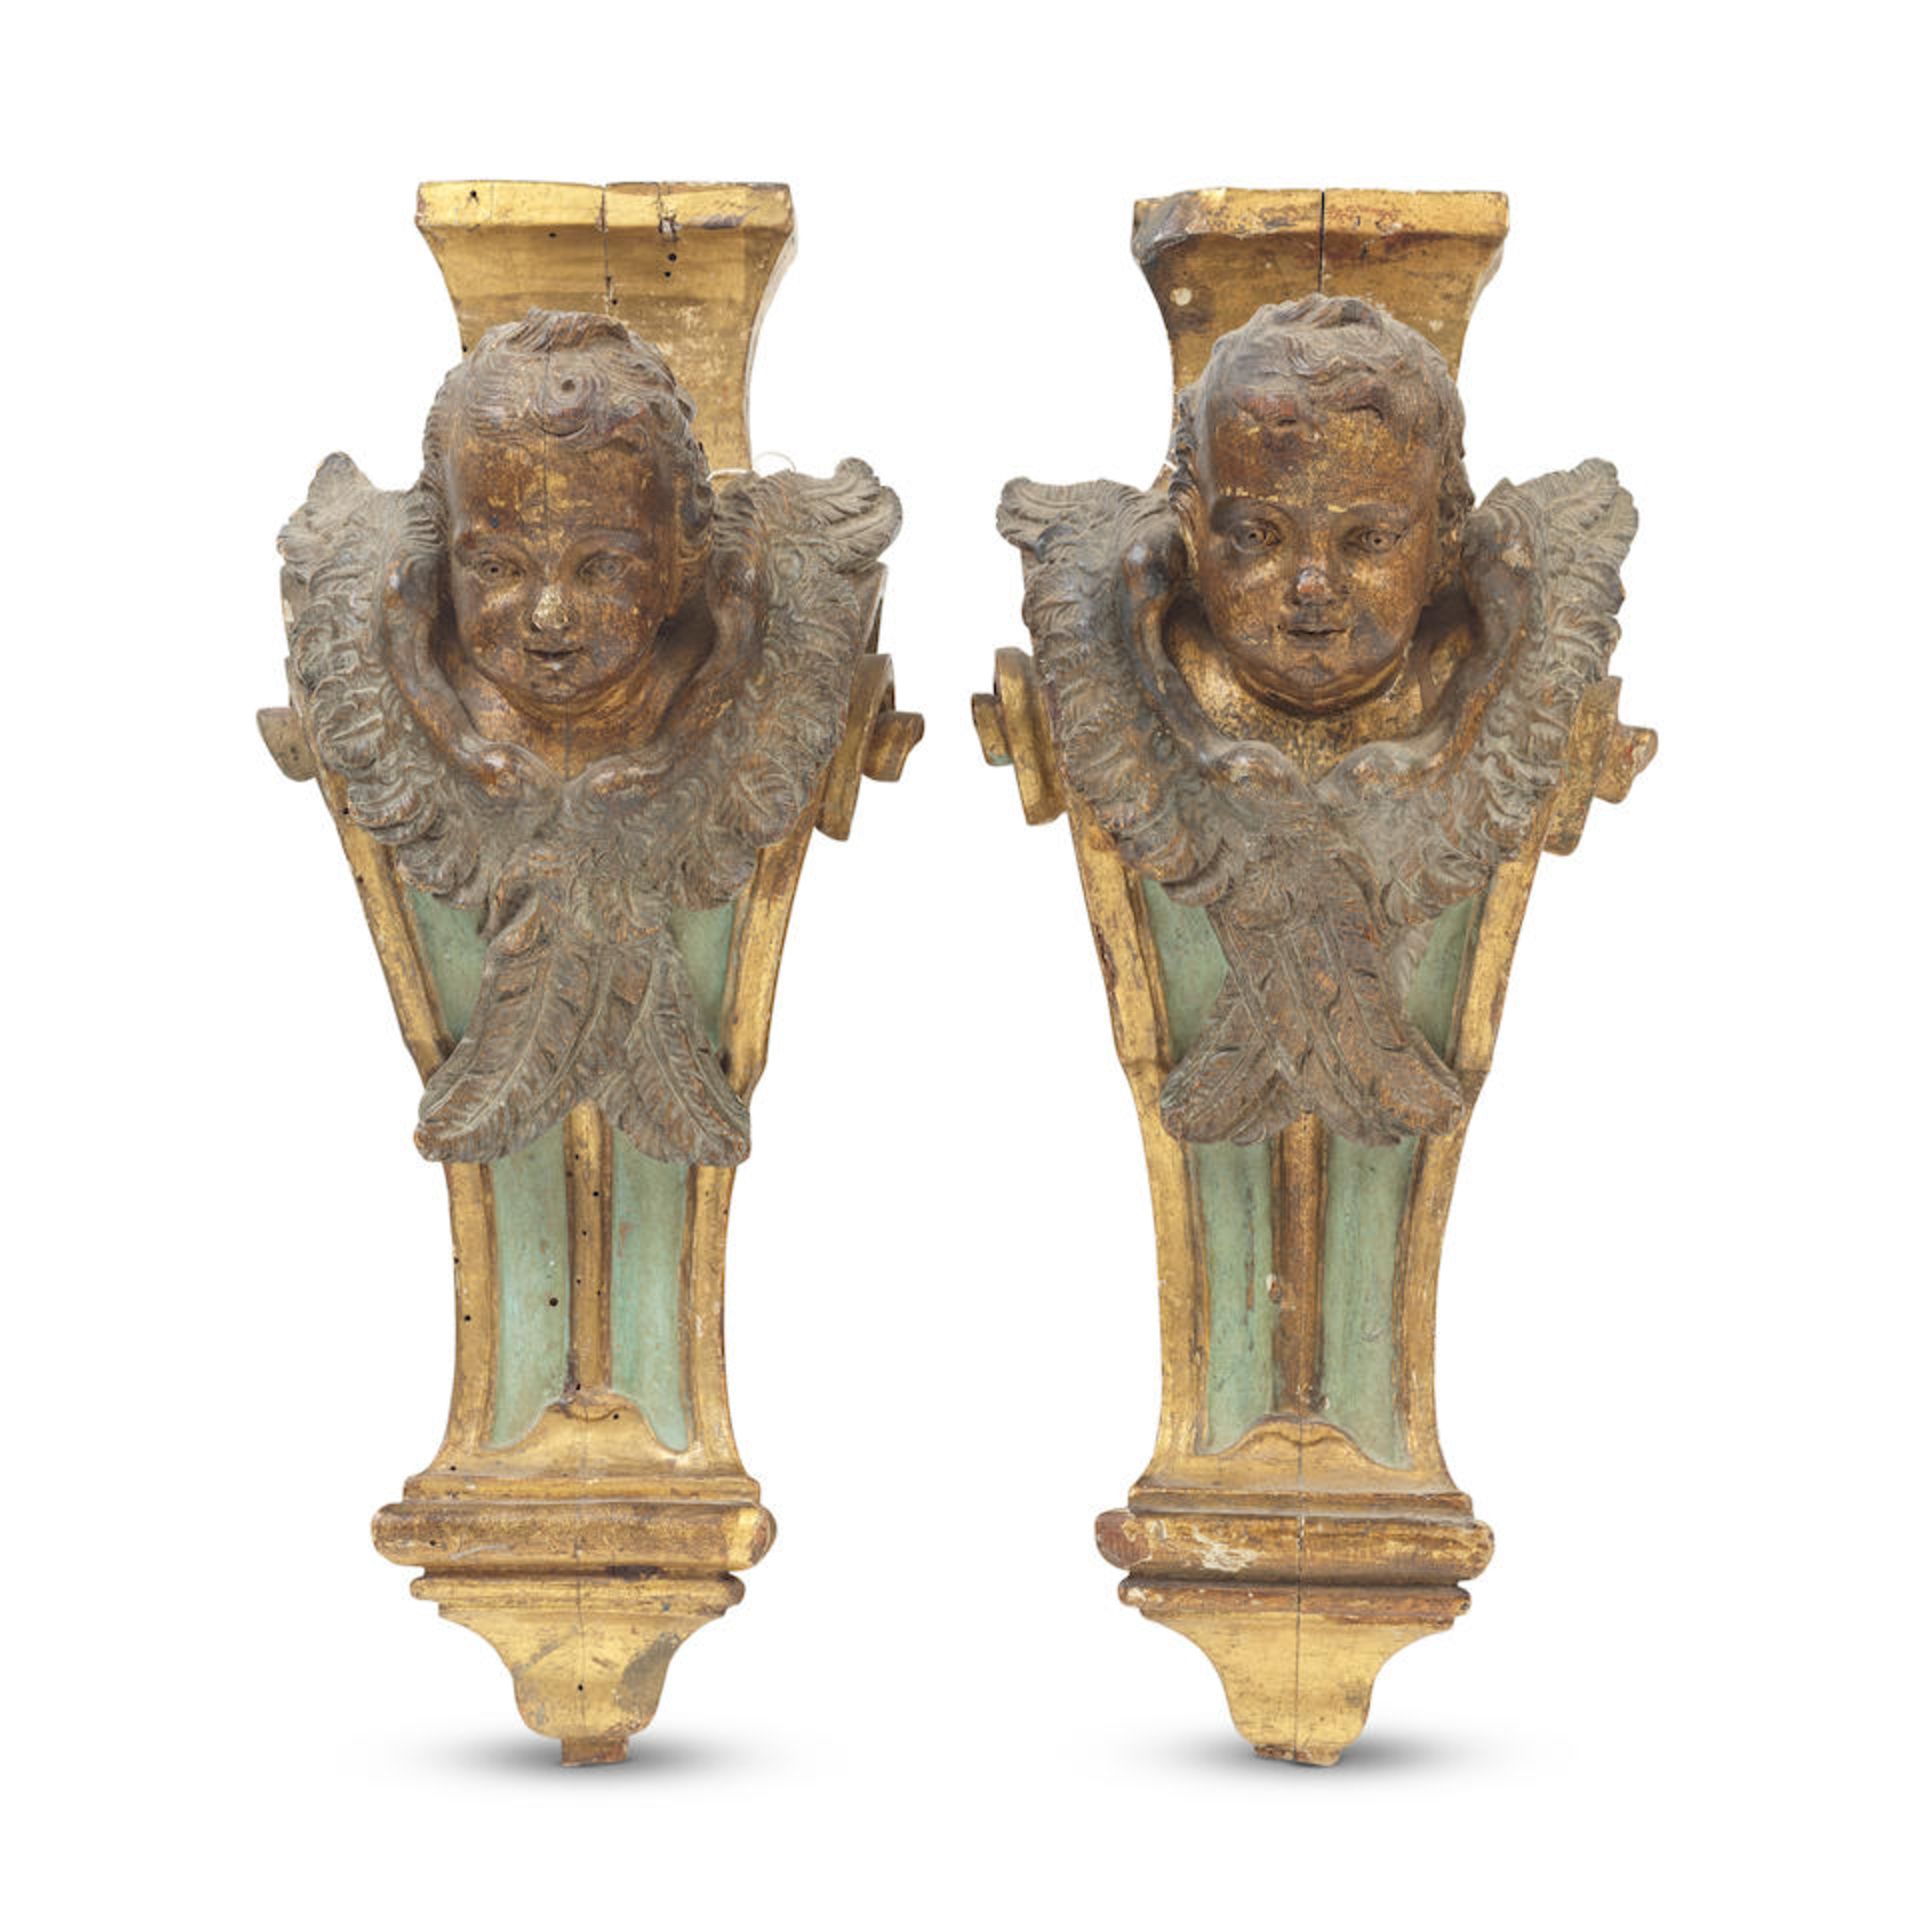 A pair of 19th century carved and painted and parcel gilt figural corbel mounts in the Baroque s...